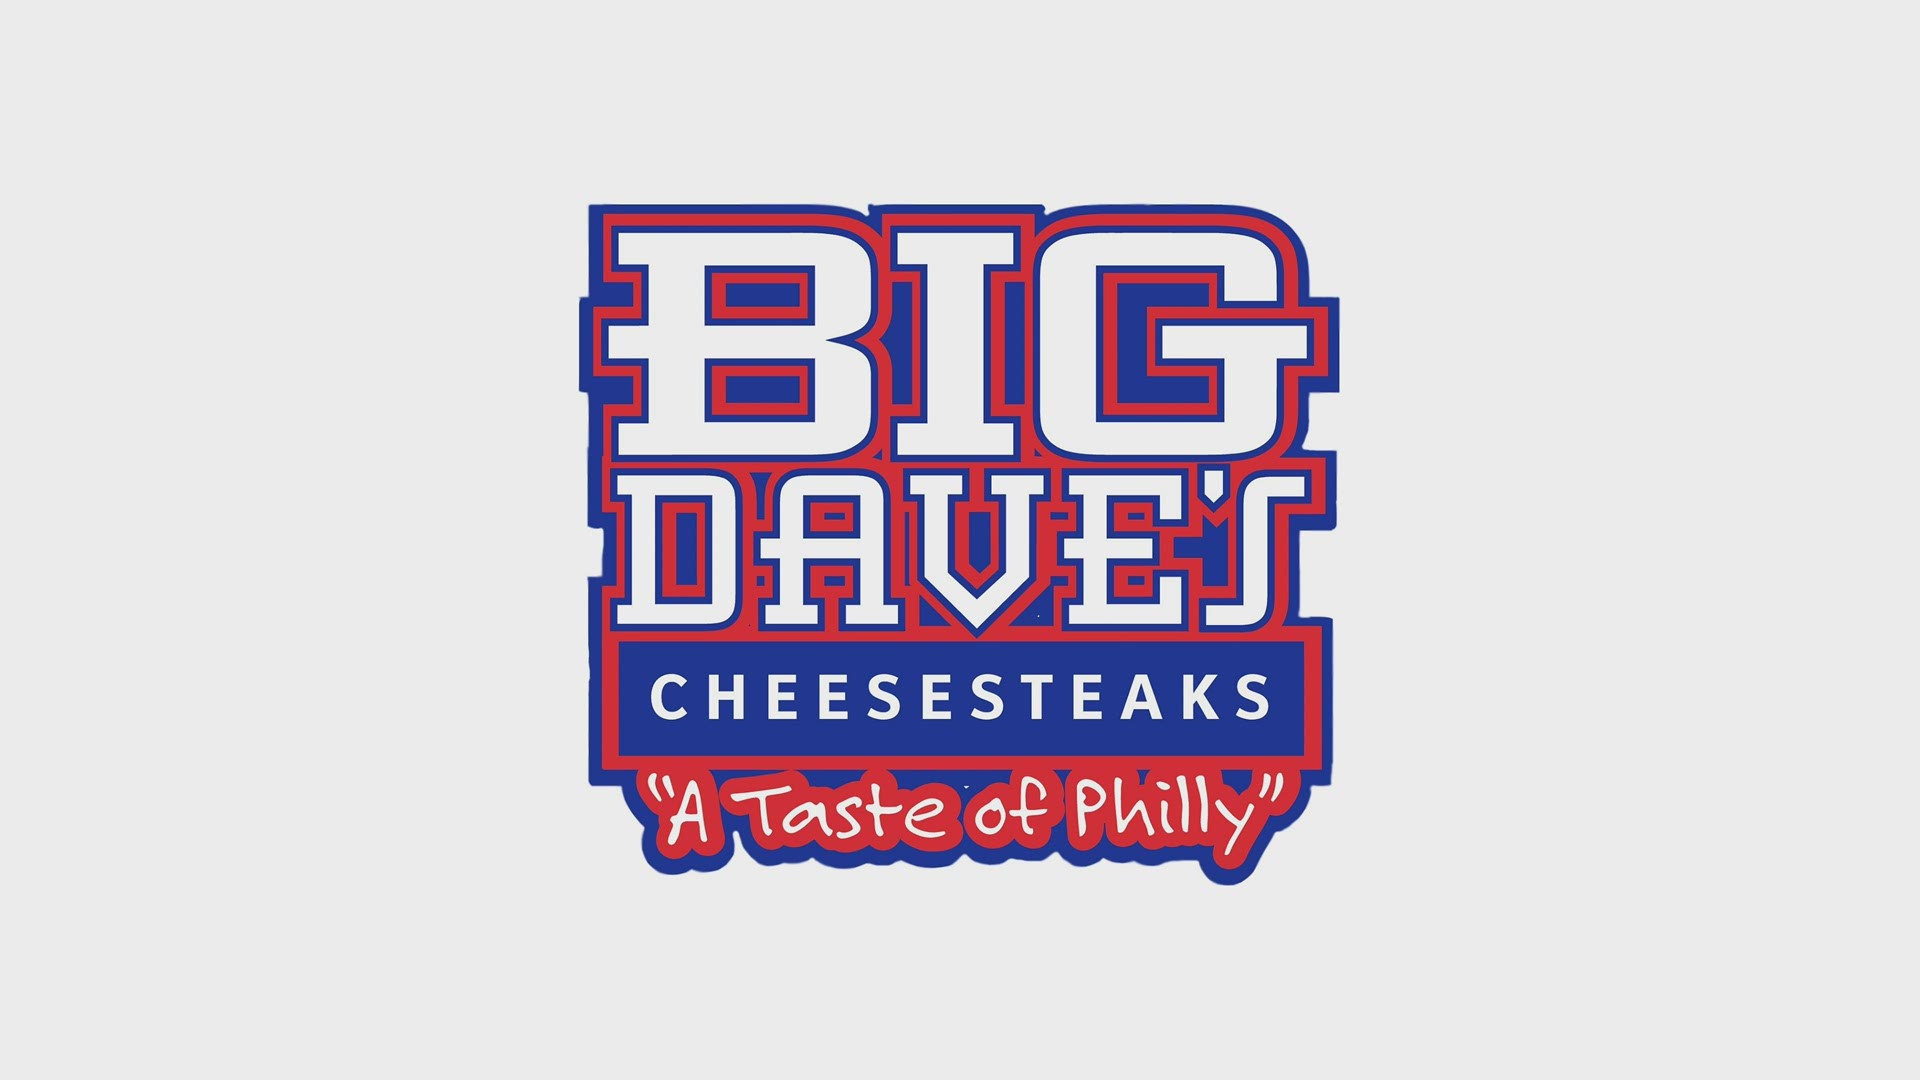 Big Dave's Cheesesteaks partnered with I Will Survive Inc by providing holiday cheer for two deserving mothers currently battling cancer.